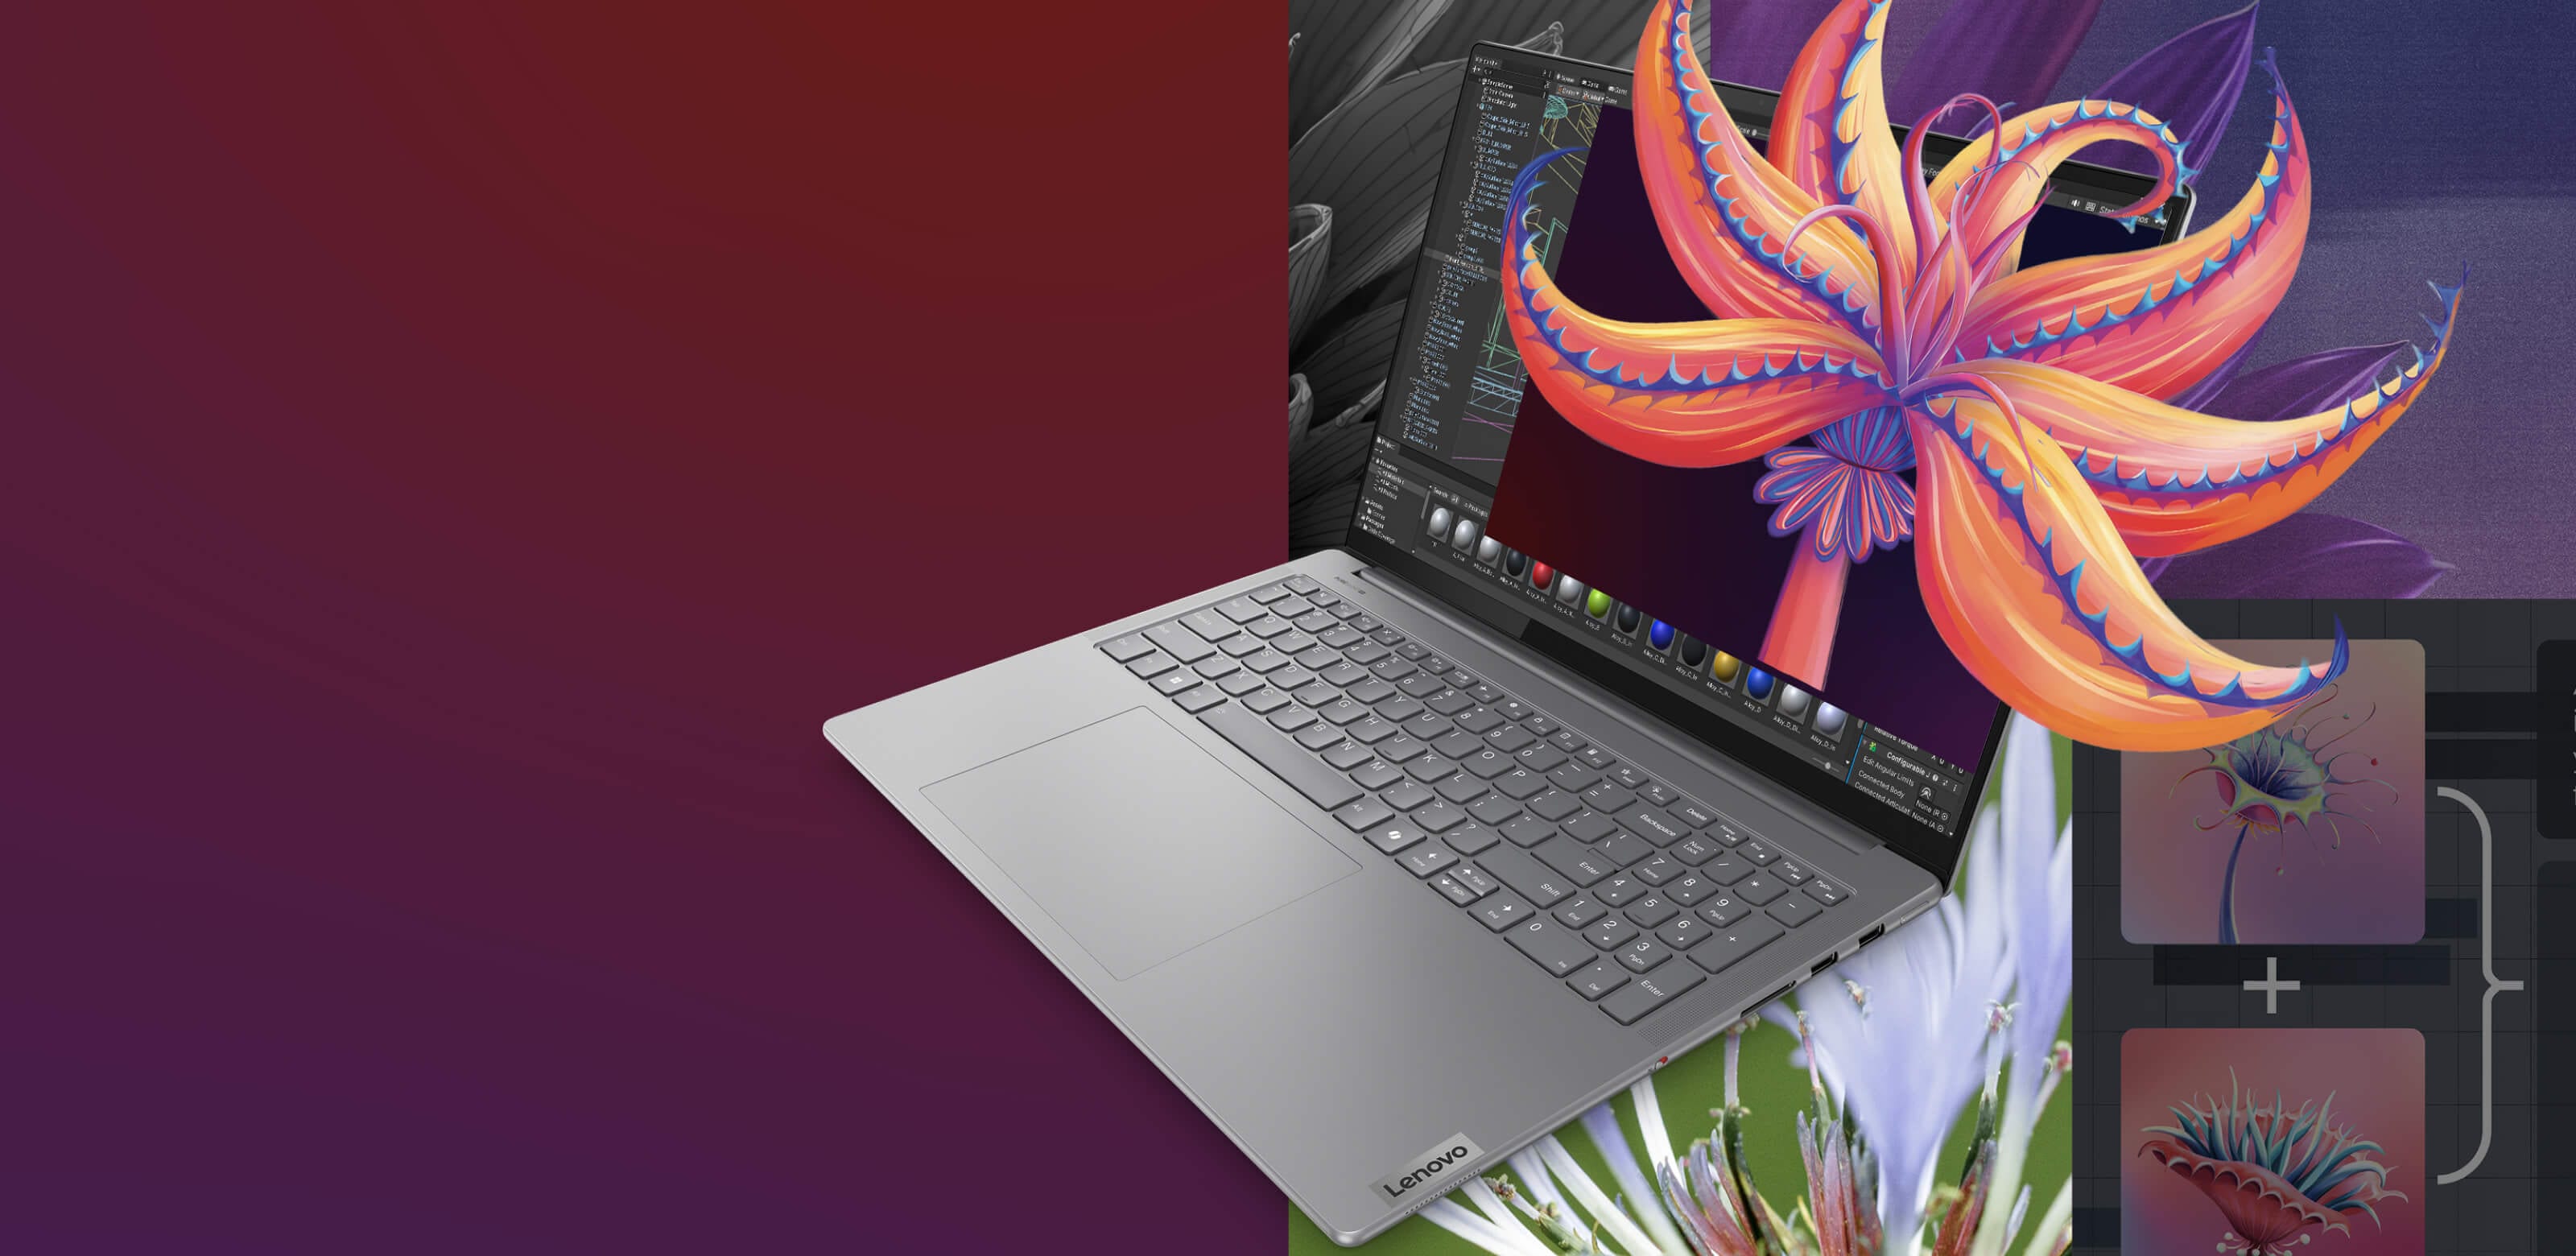 Lenovo Yoga laptop displays an 3D animation program on the screen with a computer generated flower illustration breaking out of the screen.